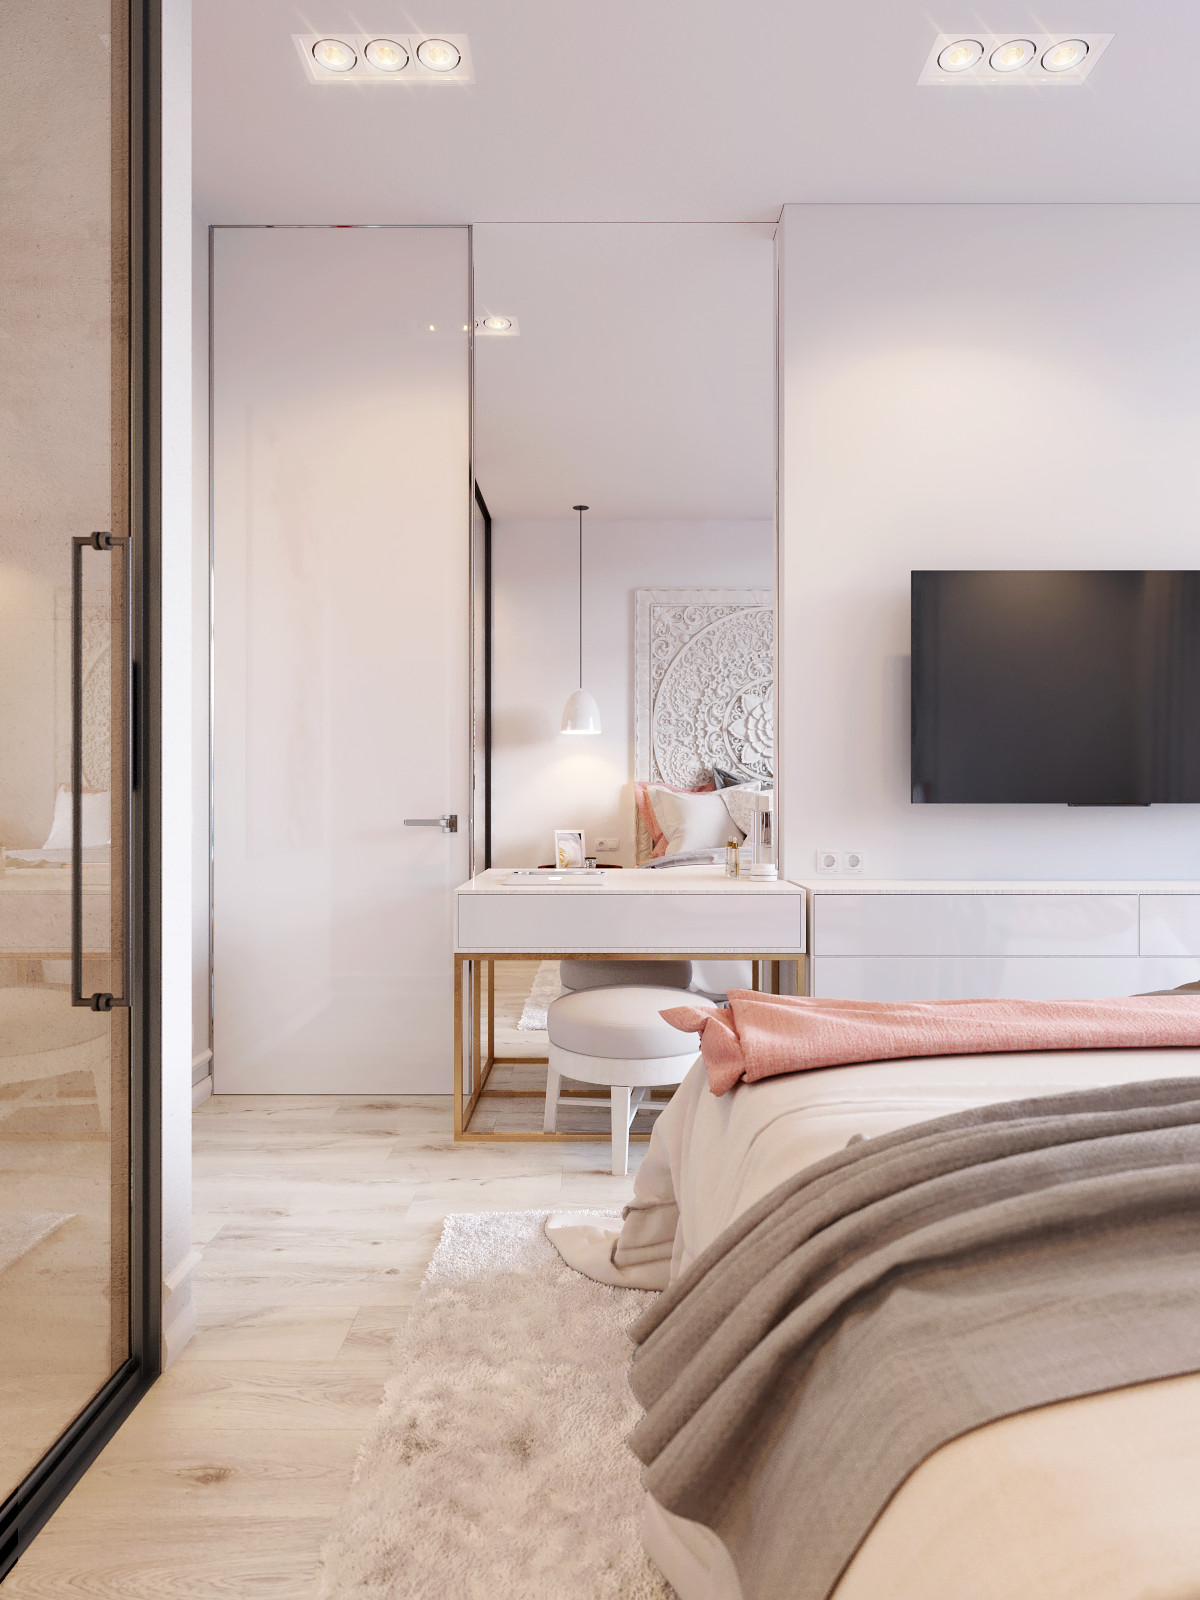 Small Apartment Bedroom
 "Pink & White" is another concept design small apartment